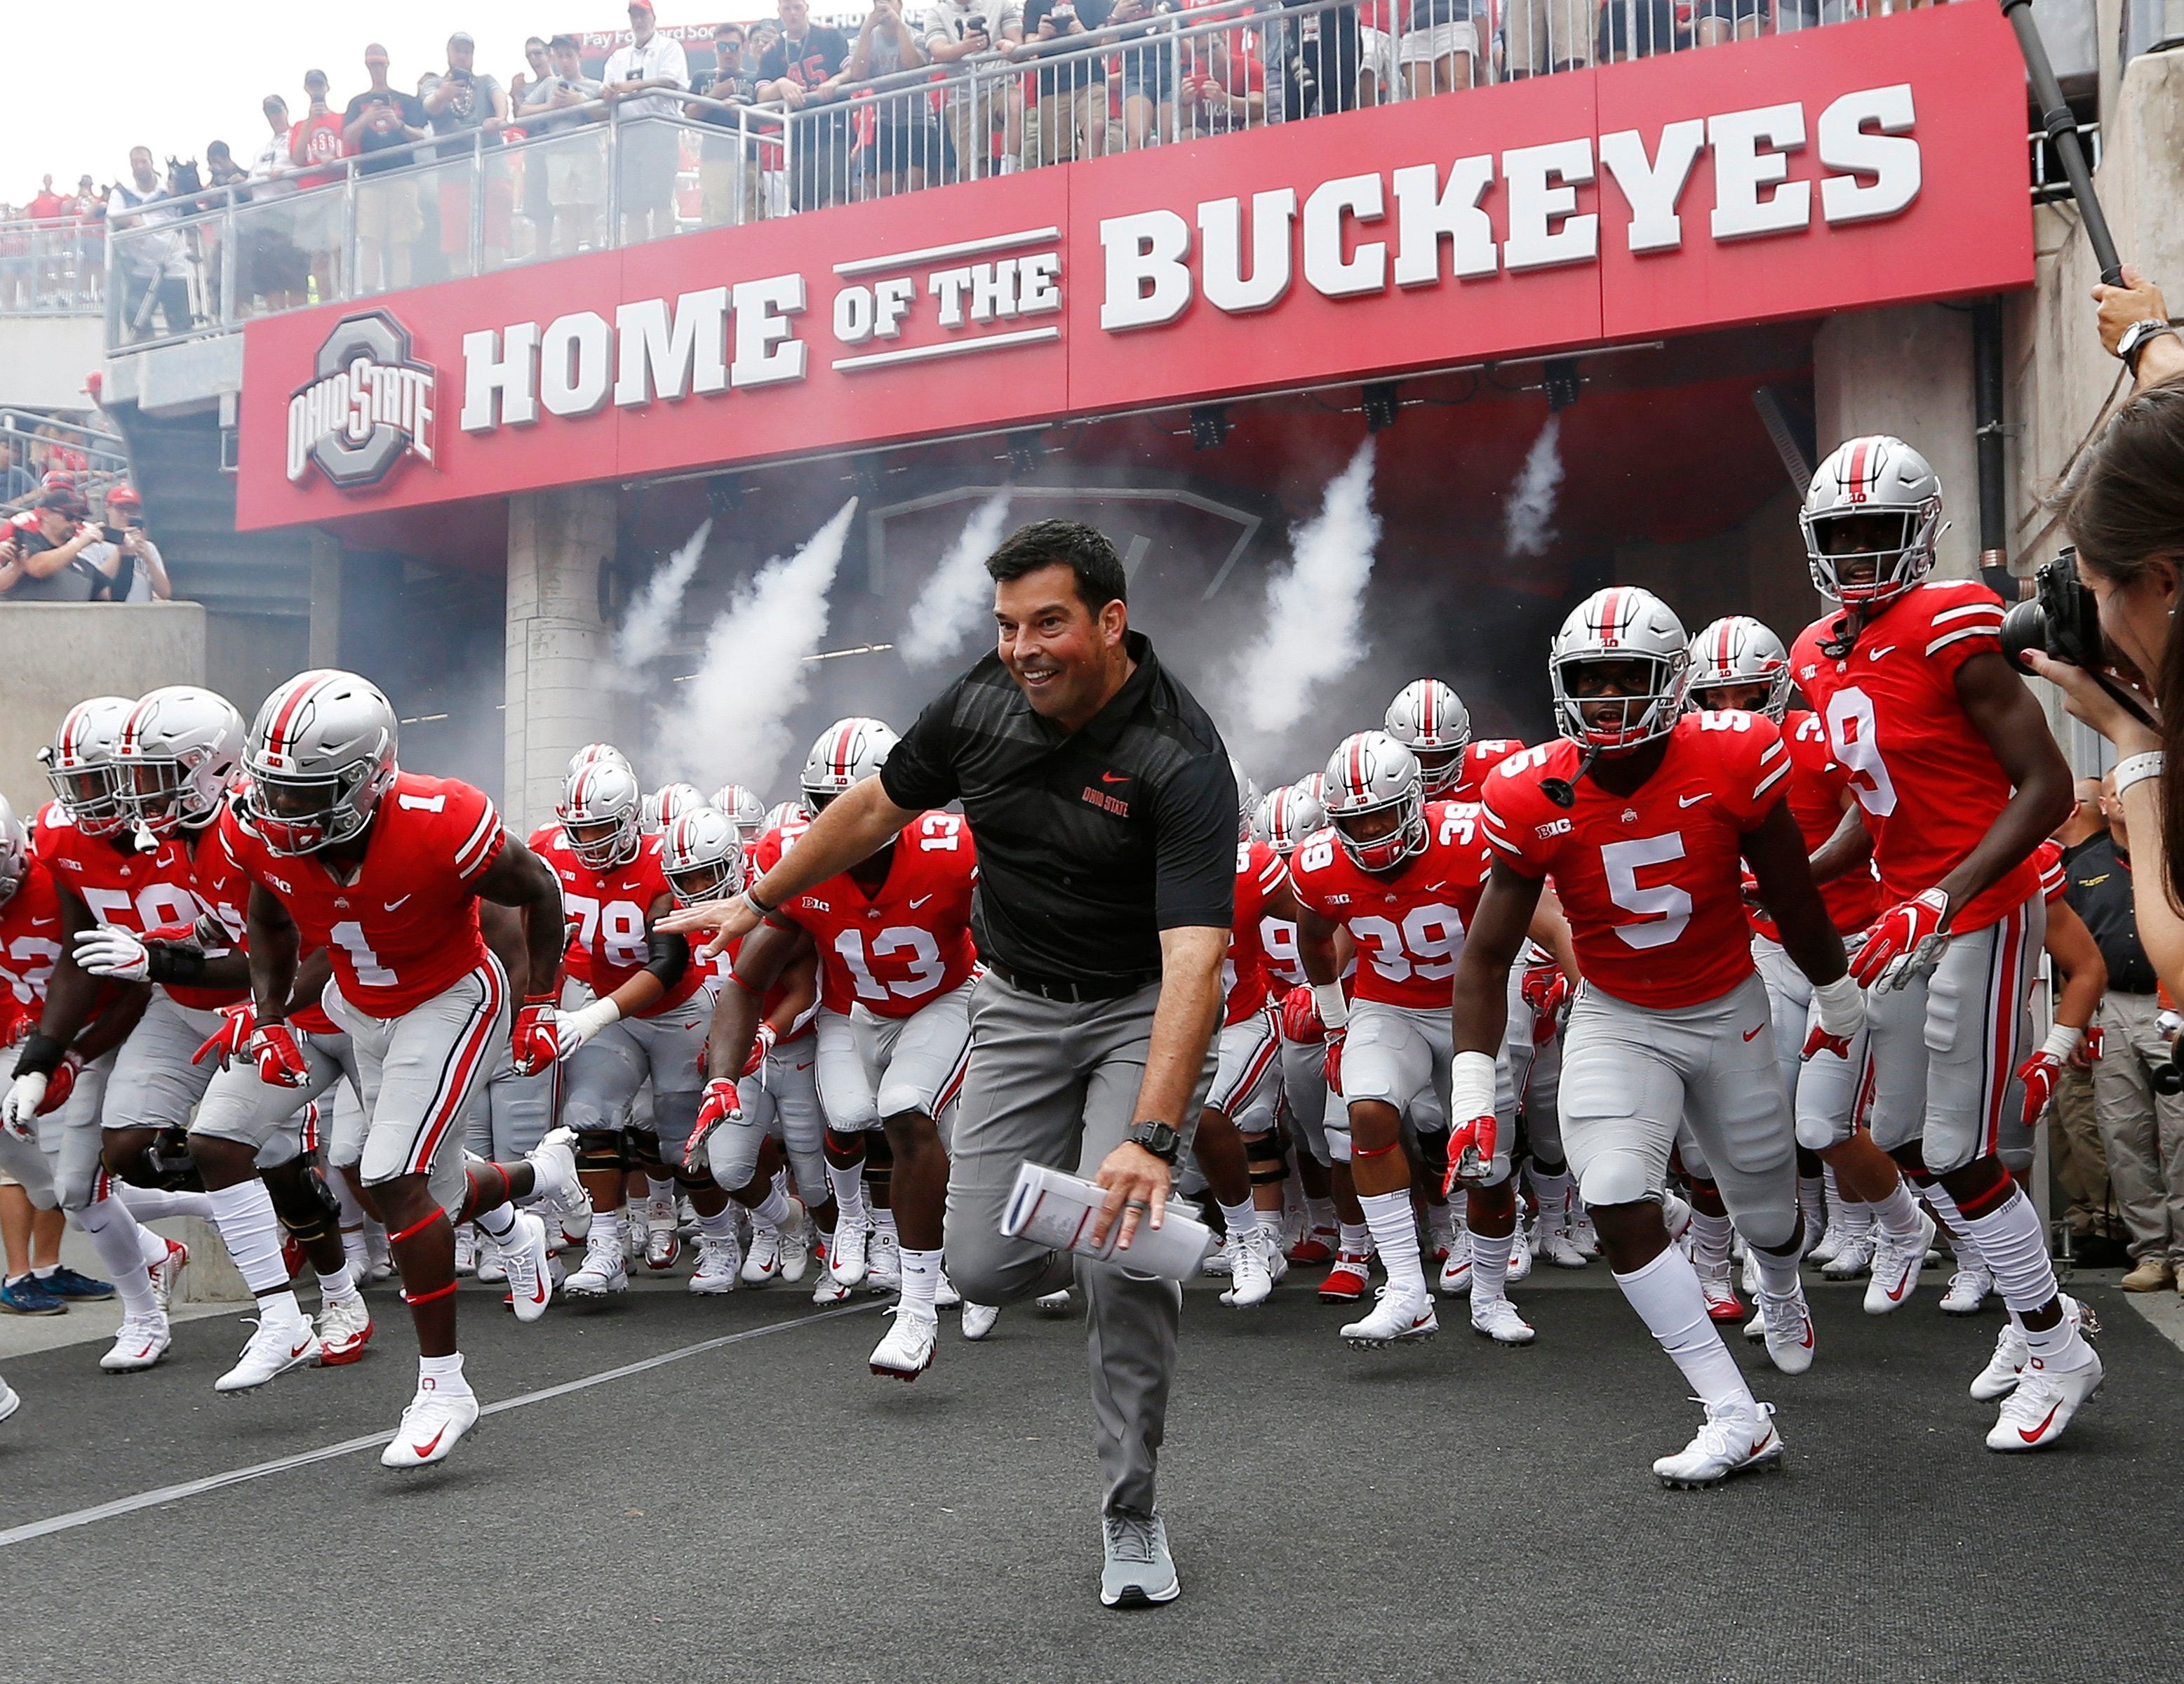 Ohio State Buckeyes head coach Ryan Day leads his team onto the field prior to the NCAA football game against Oregon State at Ohio Stadium in Columbus on Sept. 1, 2018. [Adam Cairns / Dispatch]